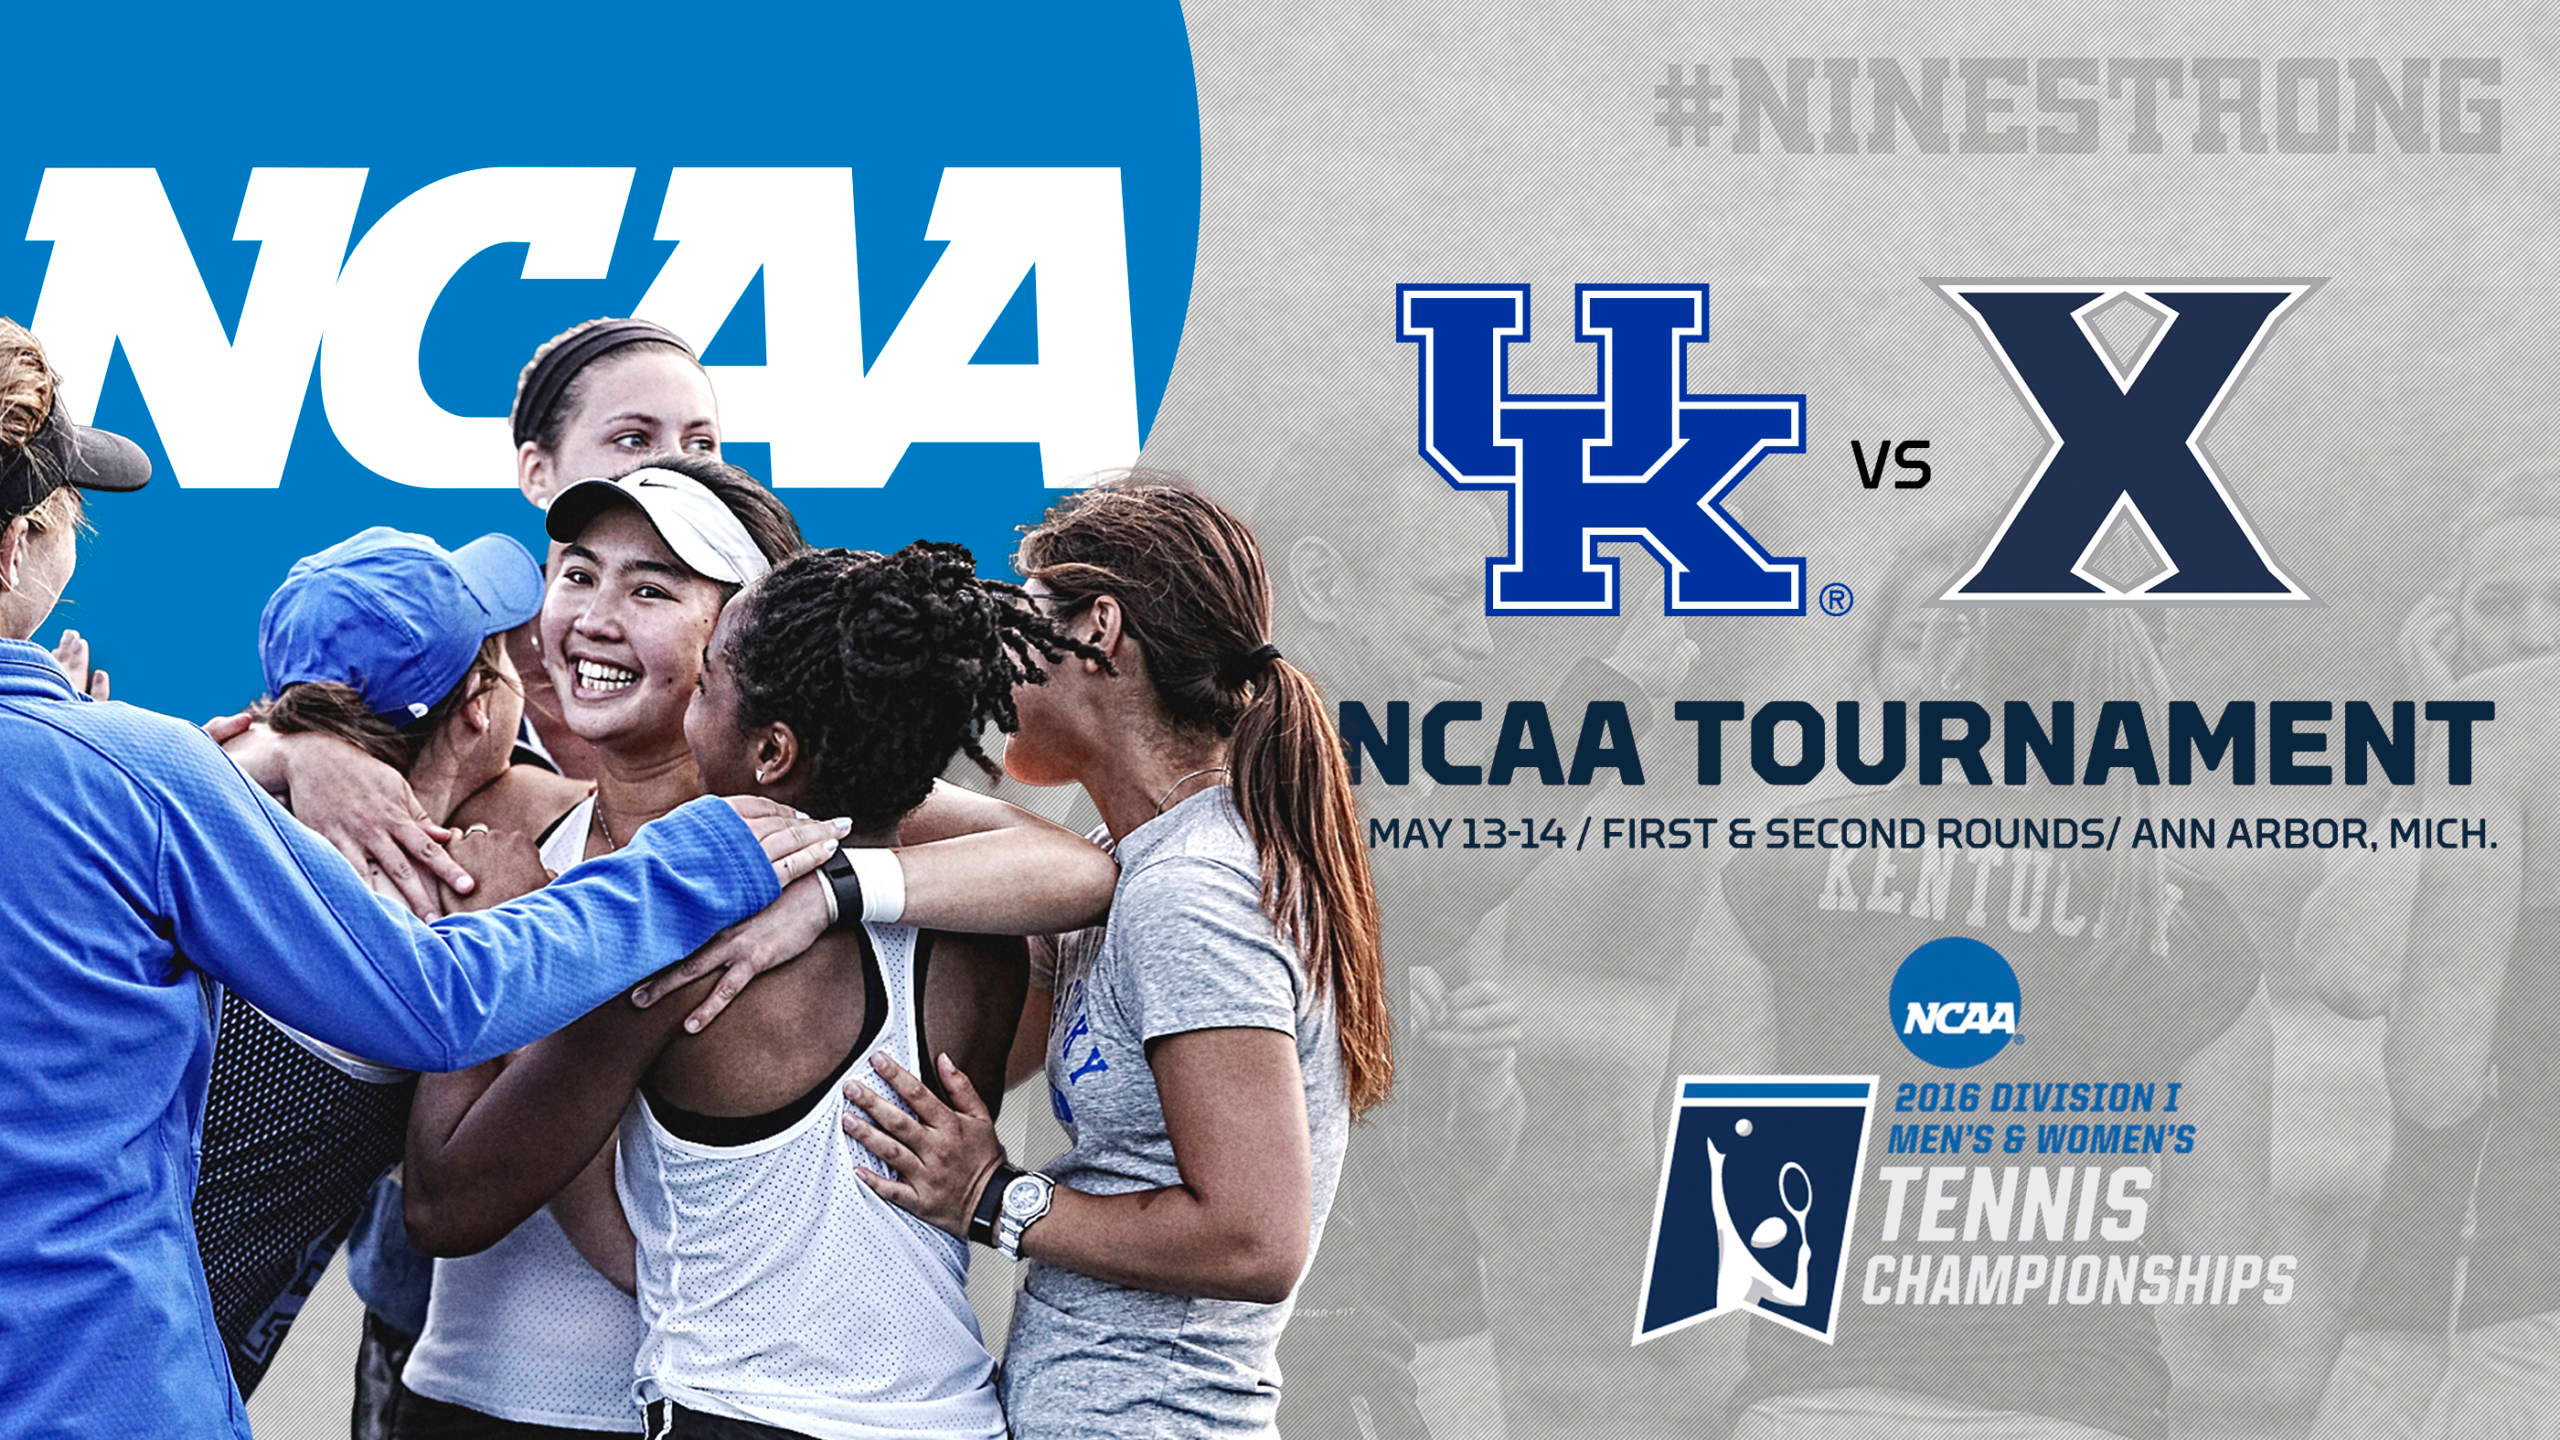 Wildcats Are Ann Arbor Bound for NCAA First & Second Rounds